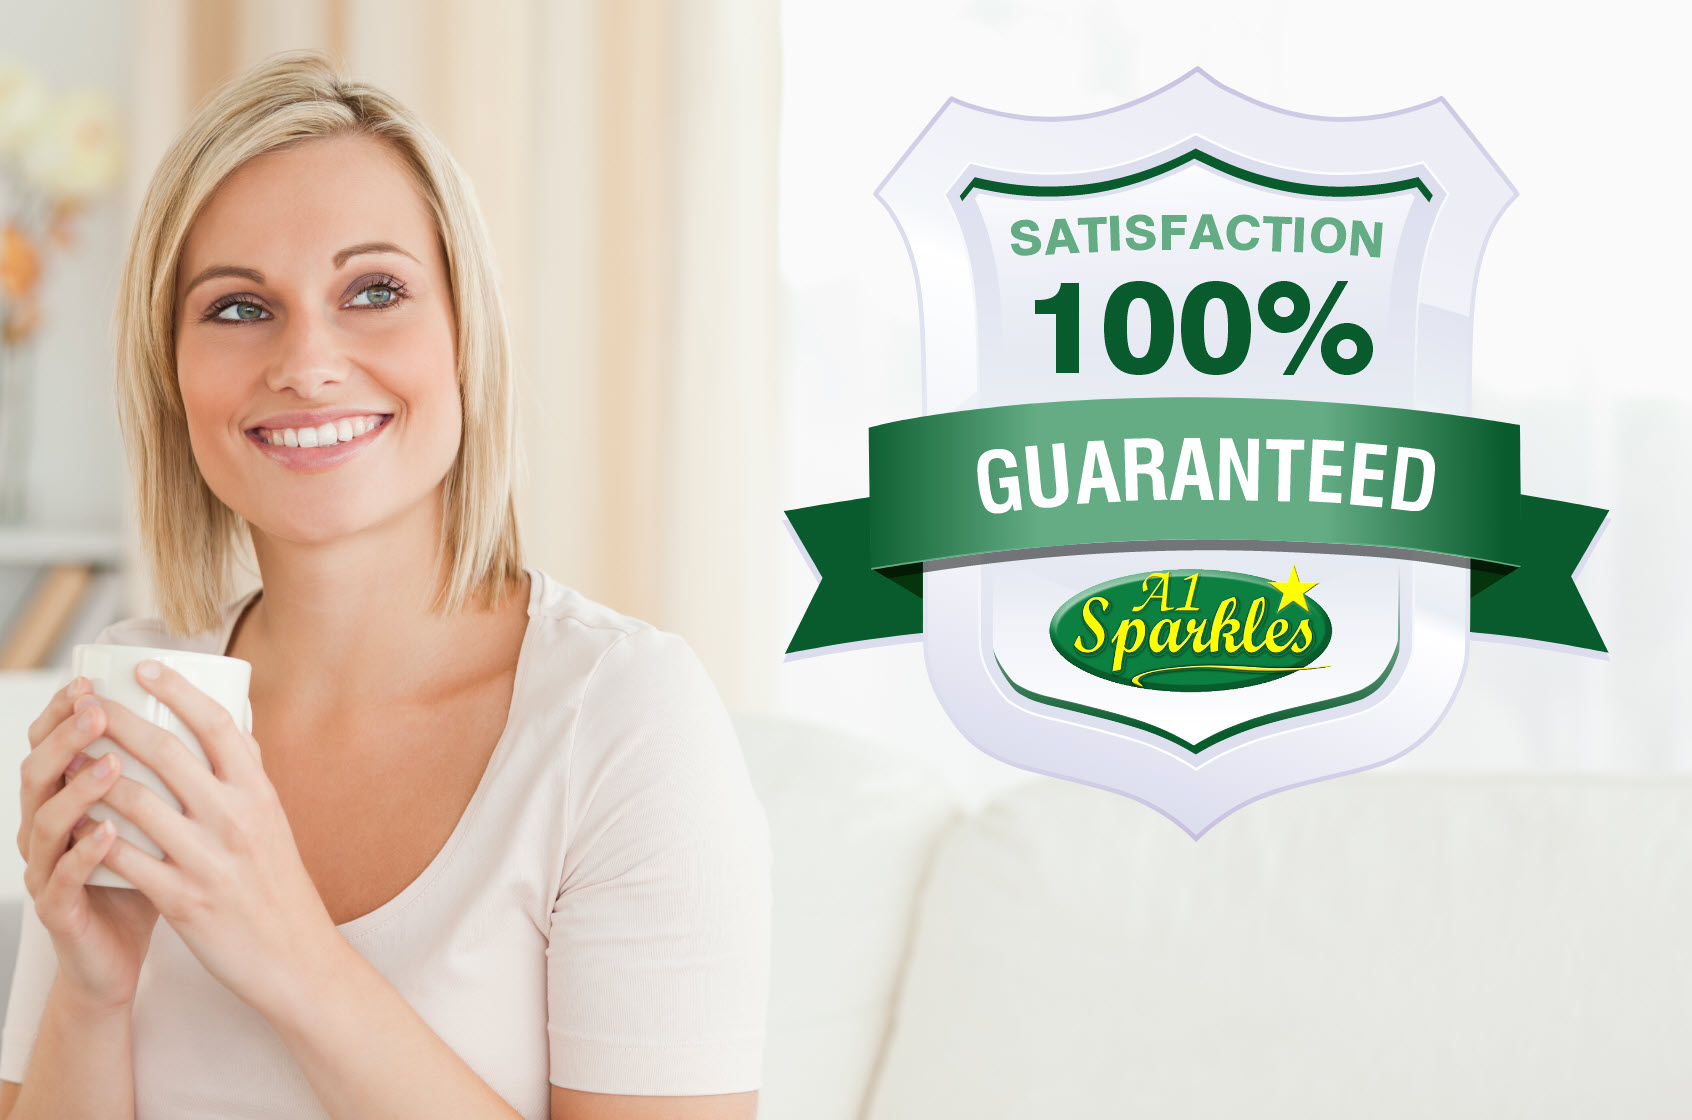 Satisfied woman smiling about A1 Sparkles Guarantee